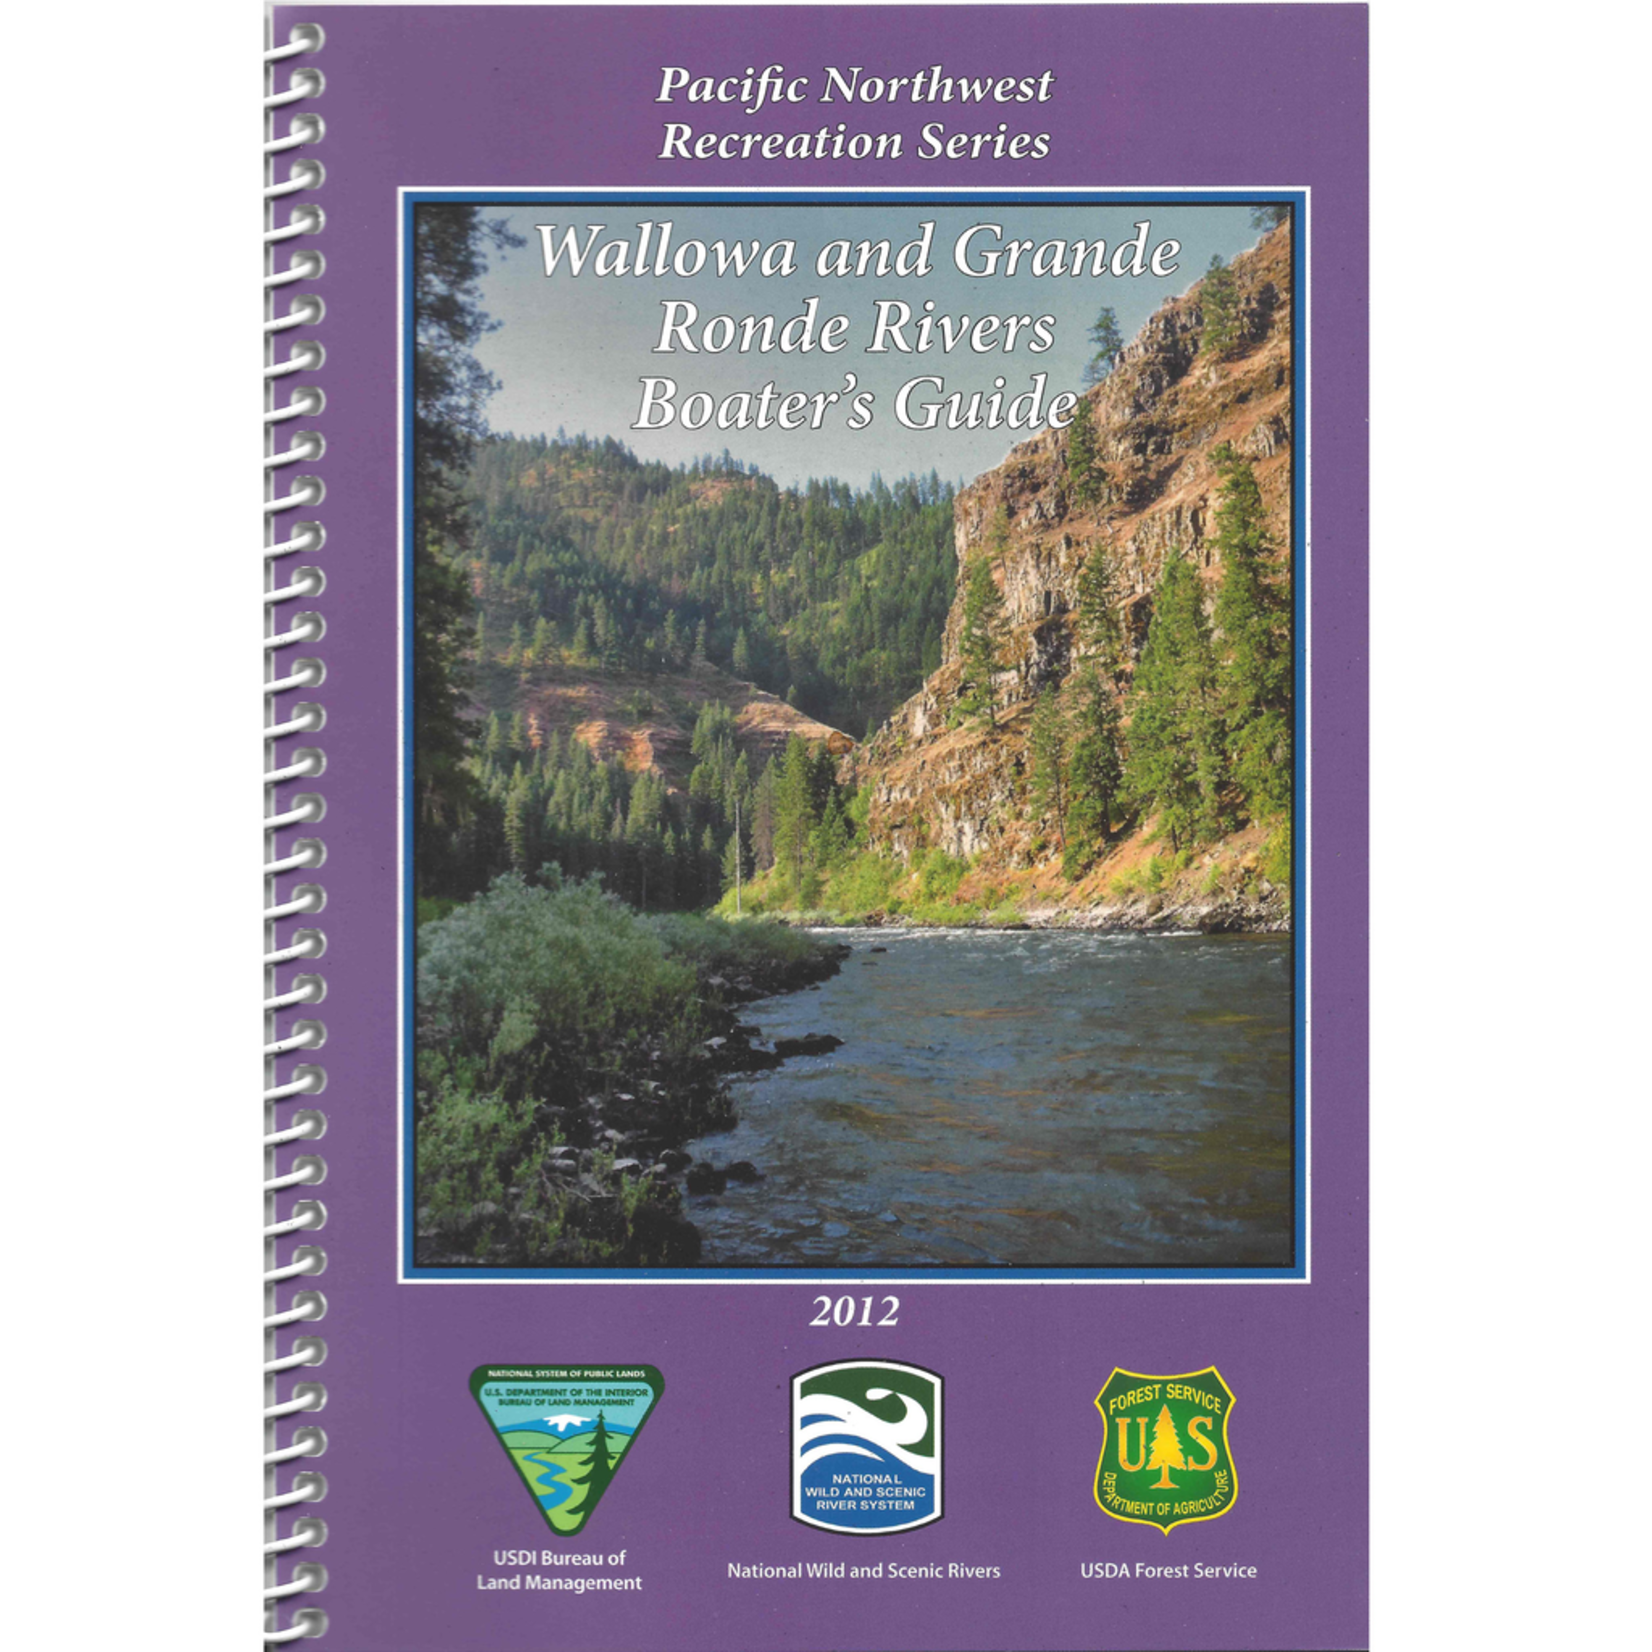 Wallowa and Grande Ronde Rivers Boater’s Guide